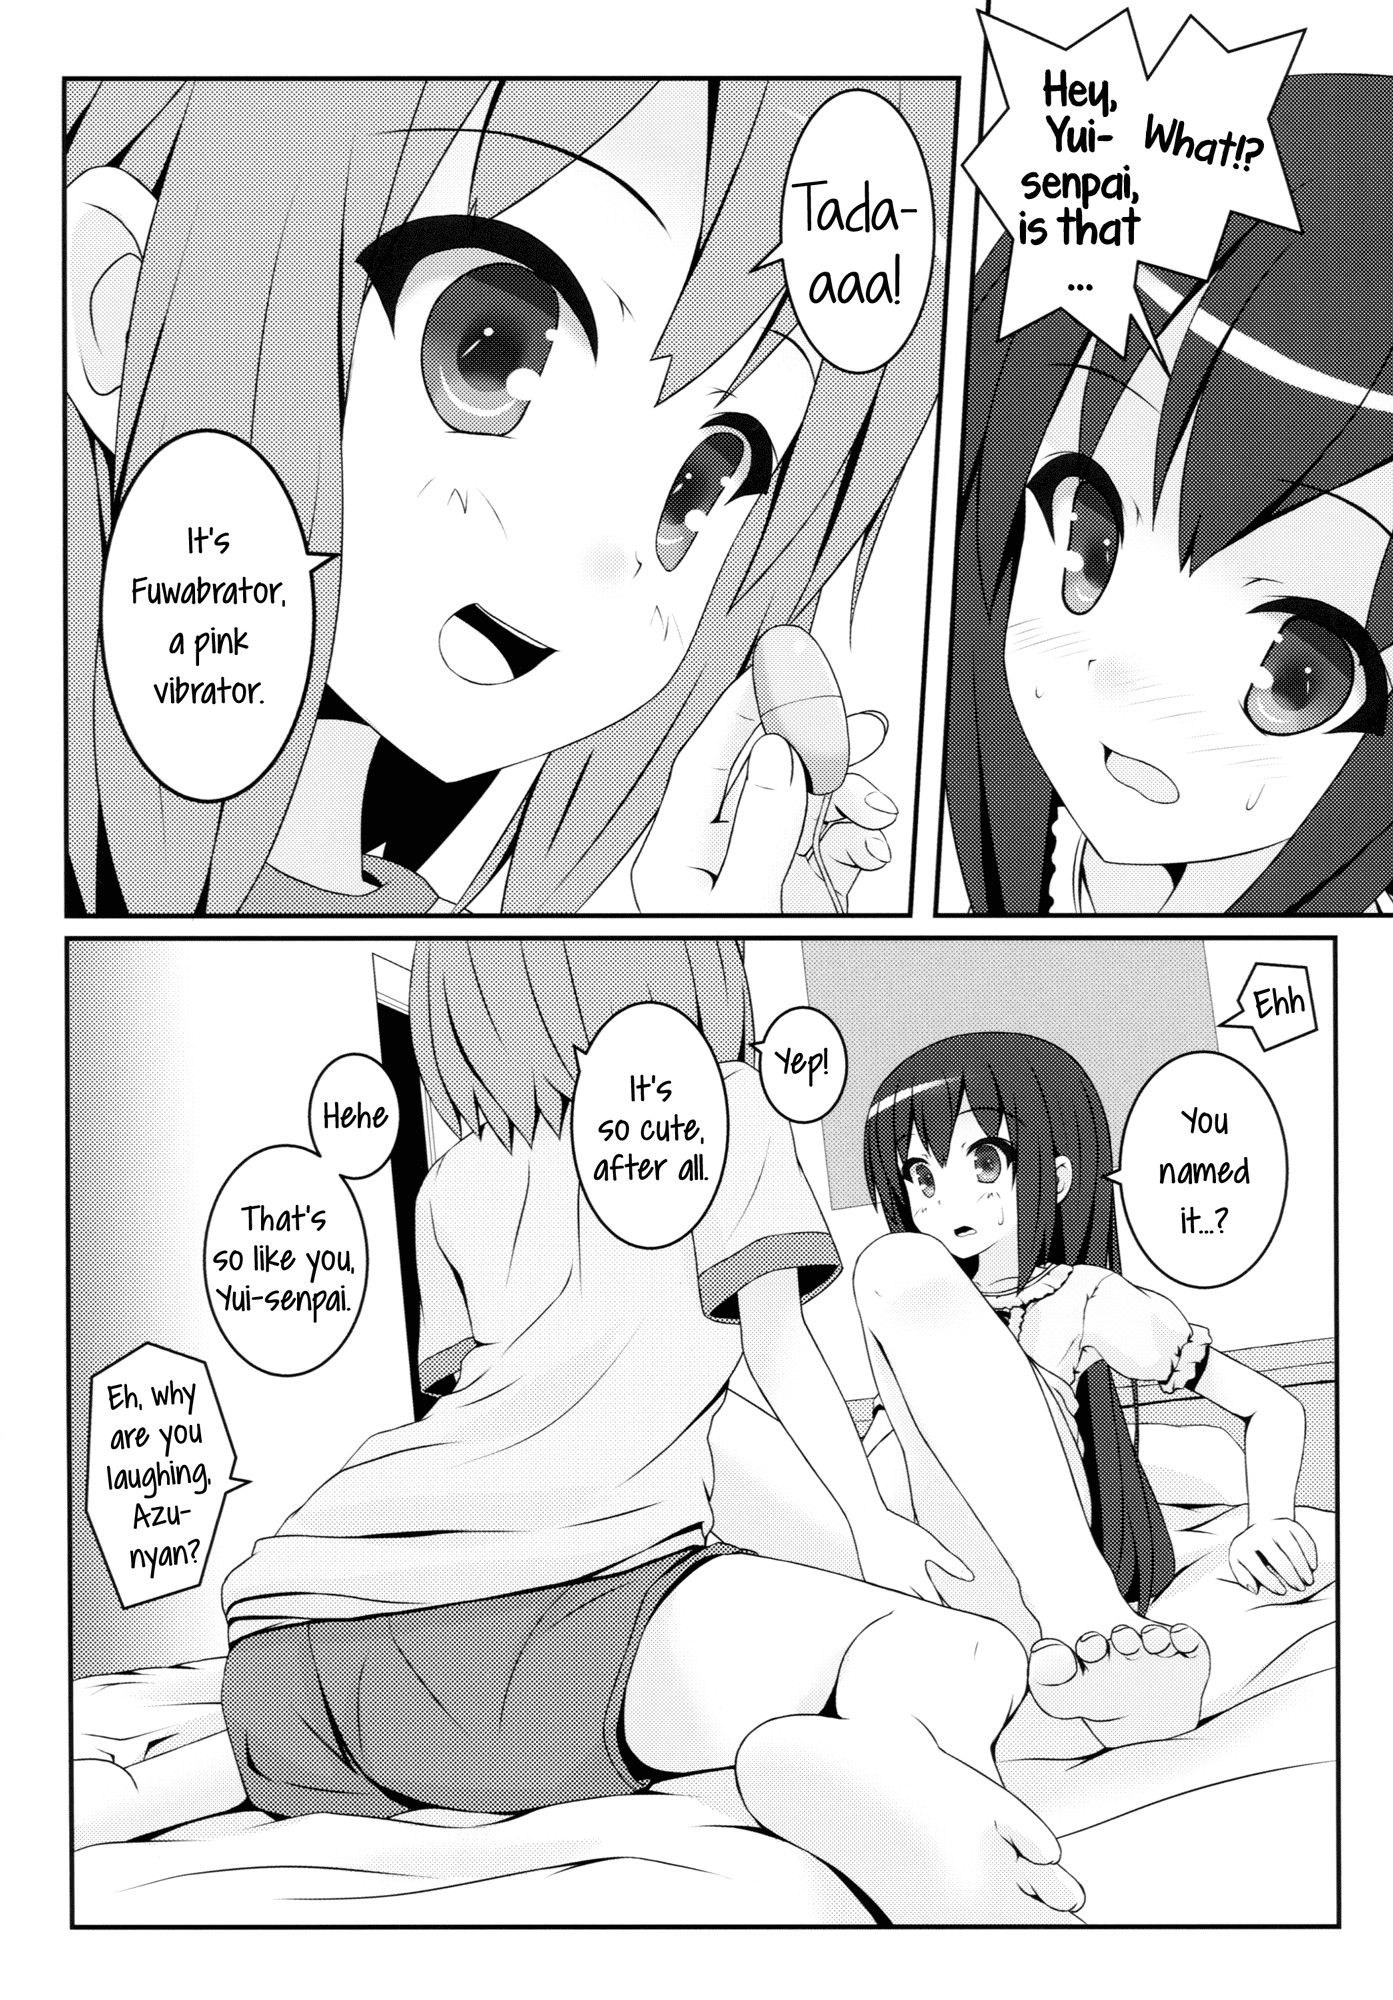 Magic for Nighttime Only hentai manga picture 9